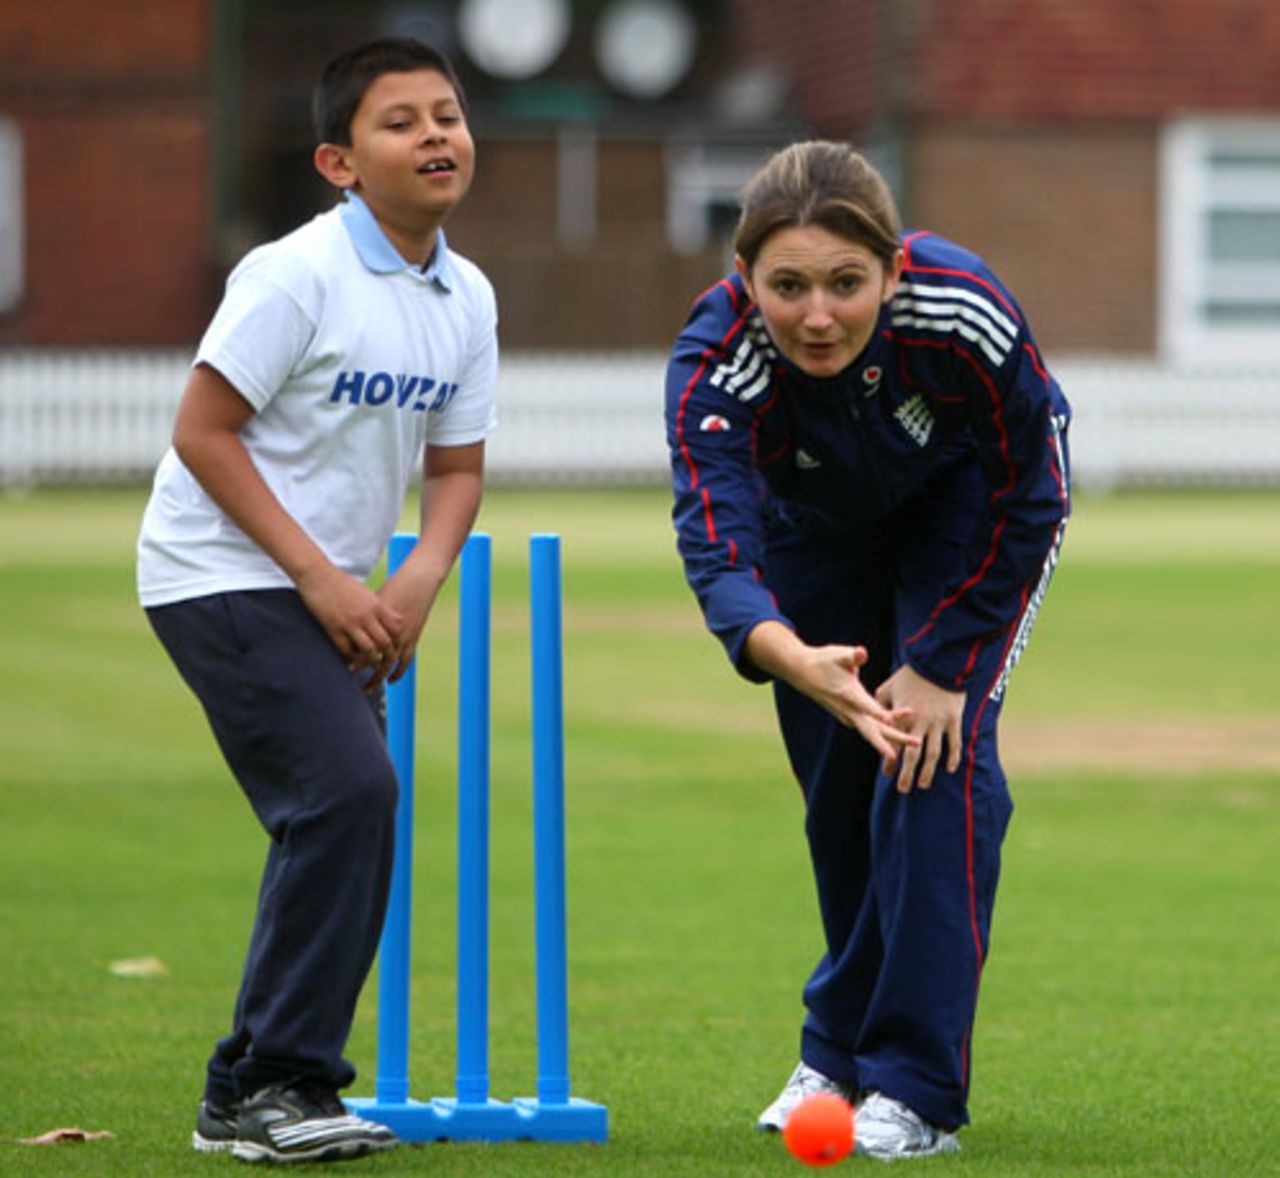 Charlotte Edwards takes part at the launch of ECB's <i>Howzat!</i>, a new educational resource to improve coaching in schools, Lord's, October 6, 2008